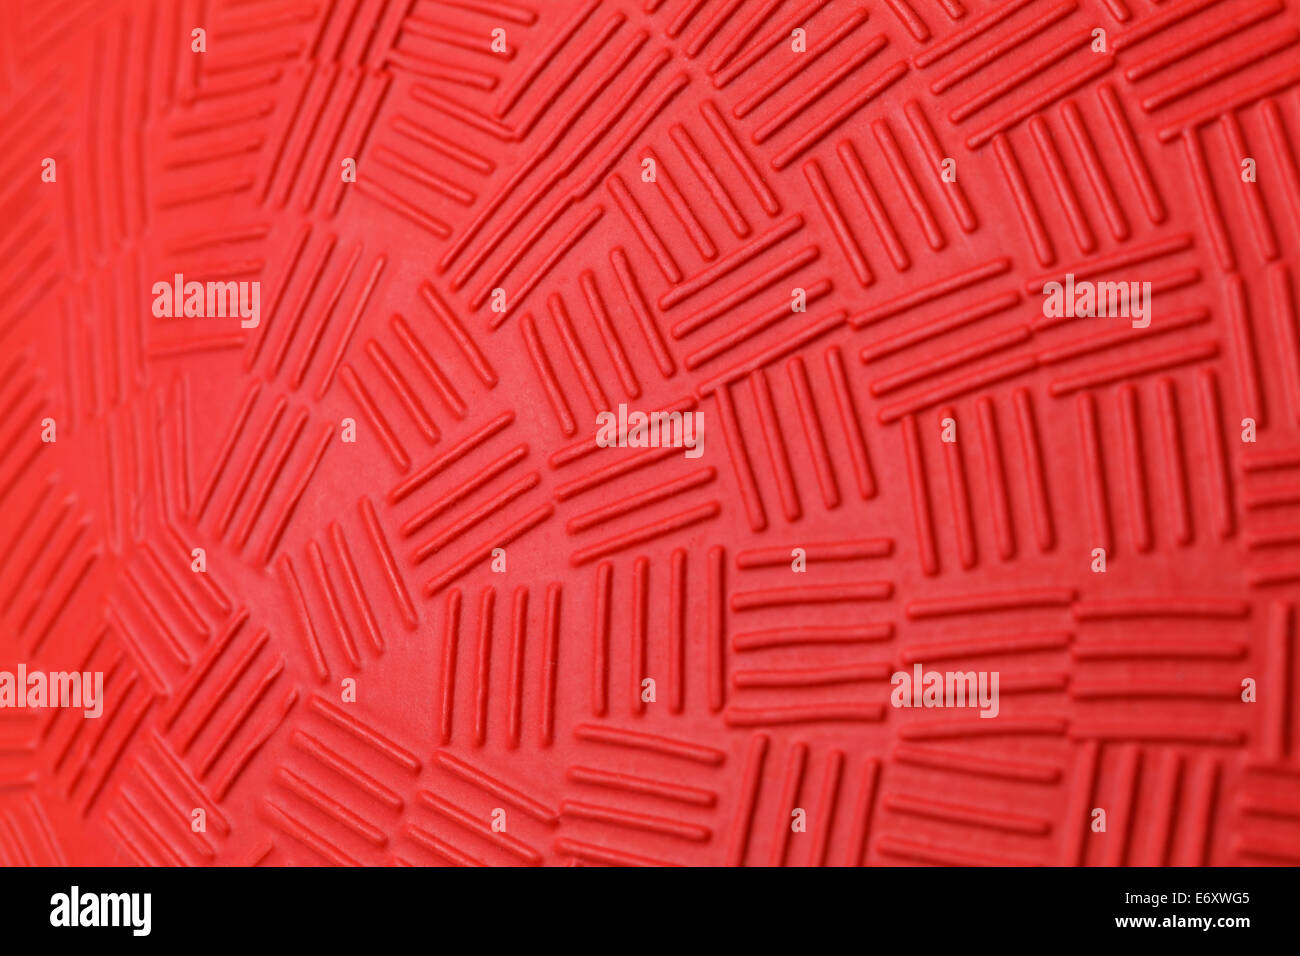 Pattern Design of Red Rubber Ball. Stock Photo